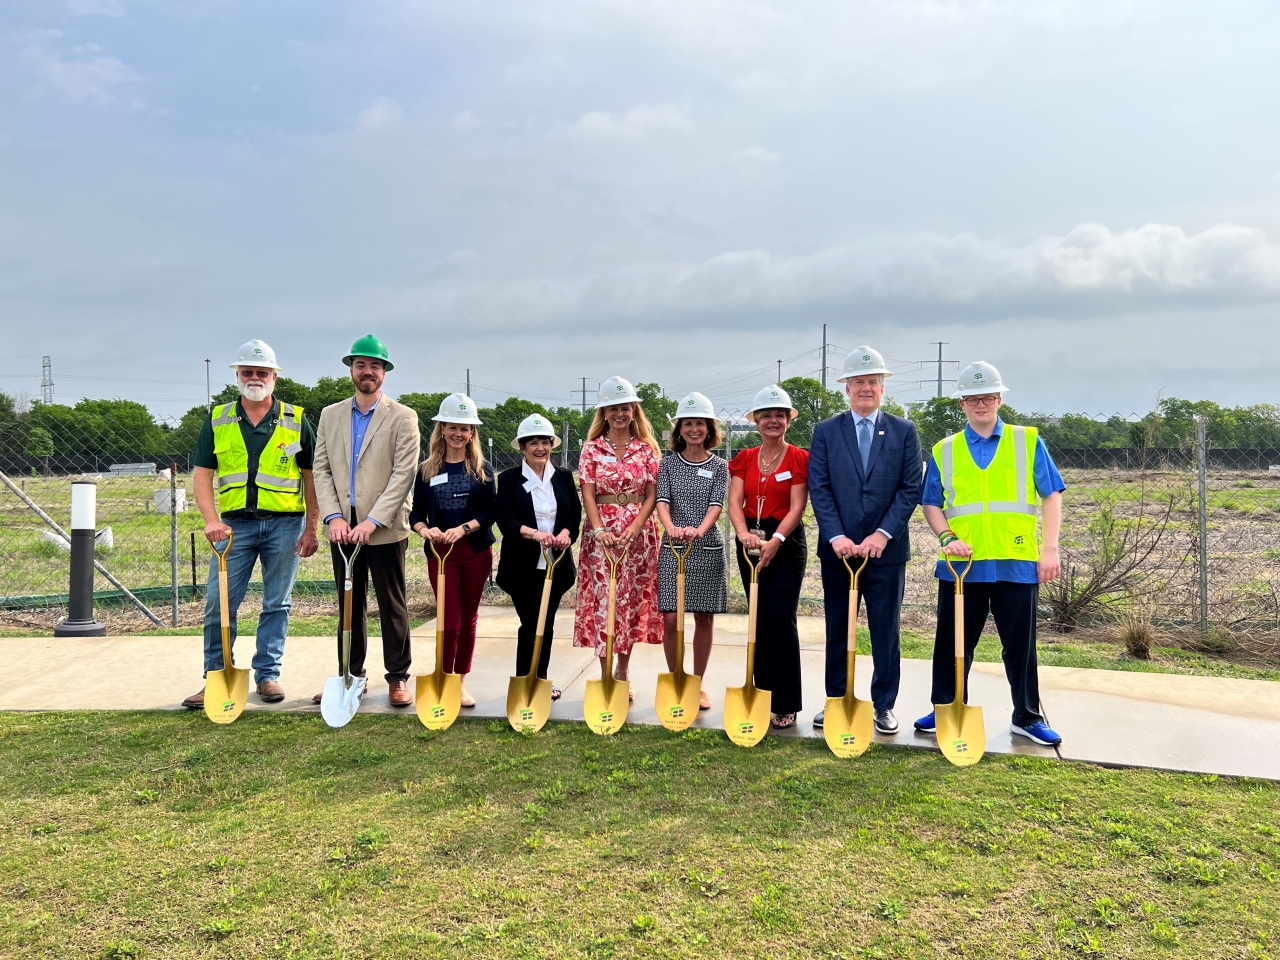 9 people with hardhats and shovels at a ground breaking event